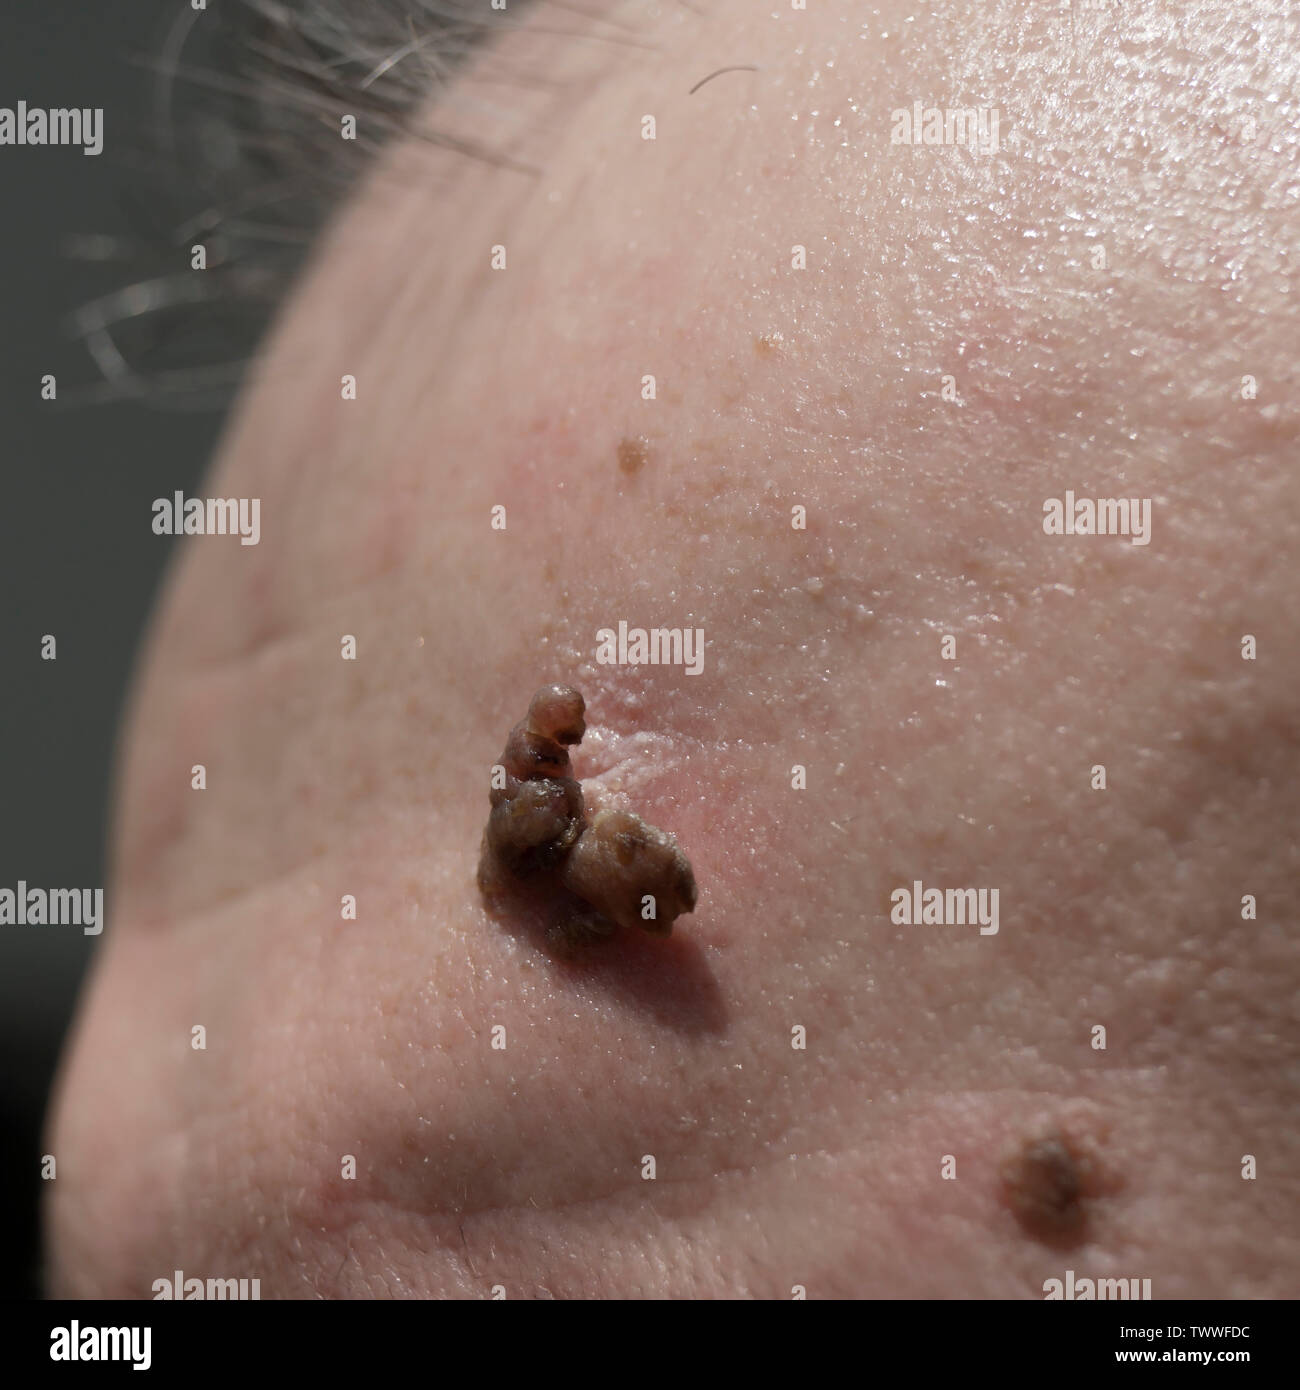 close up of suspicious mole on skin, outdoor Stock Photo